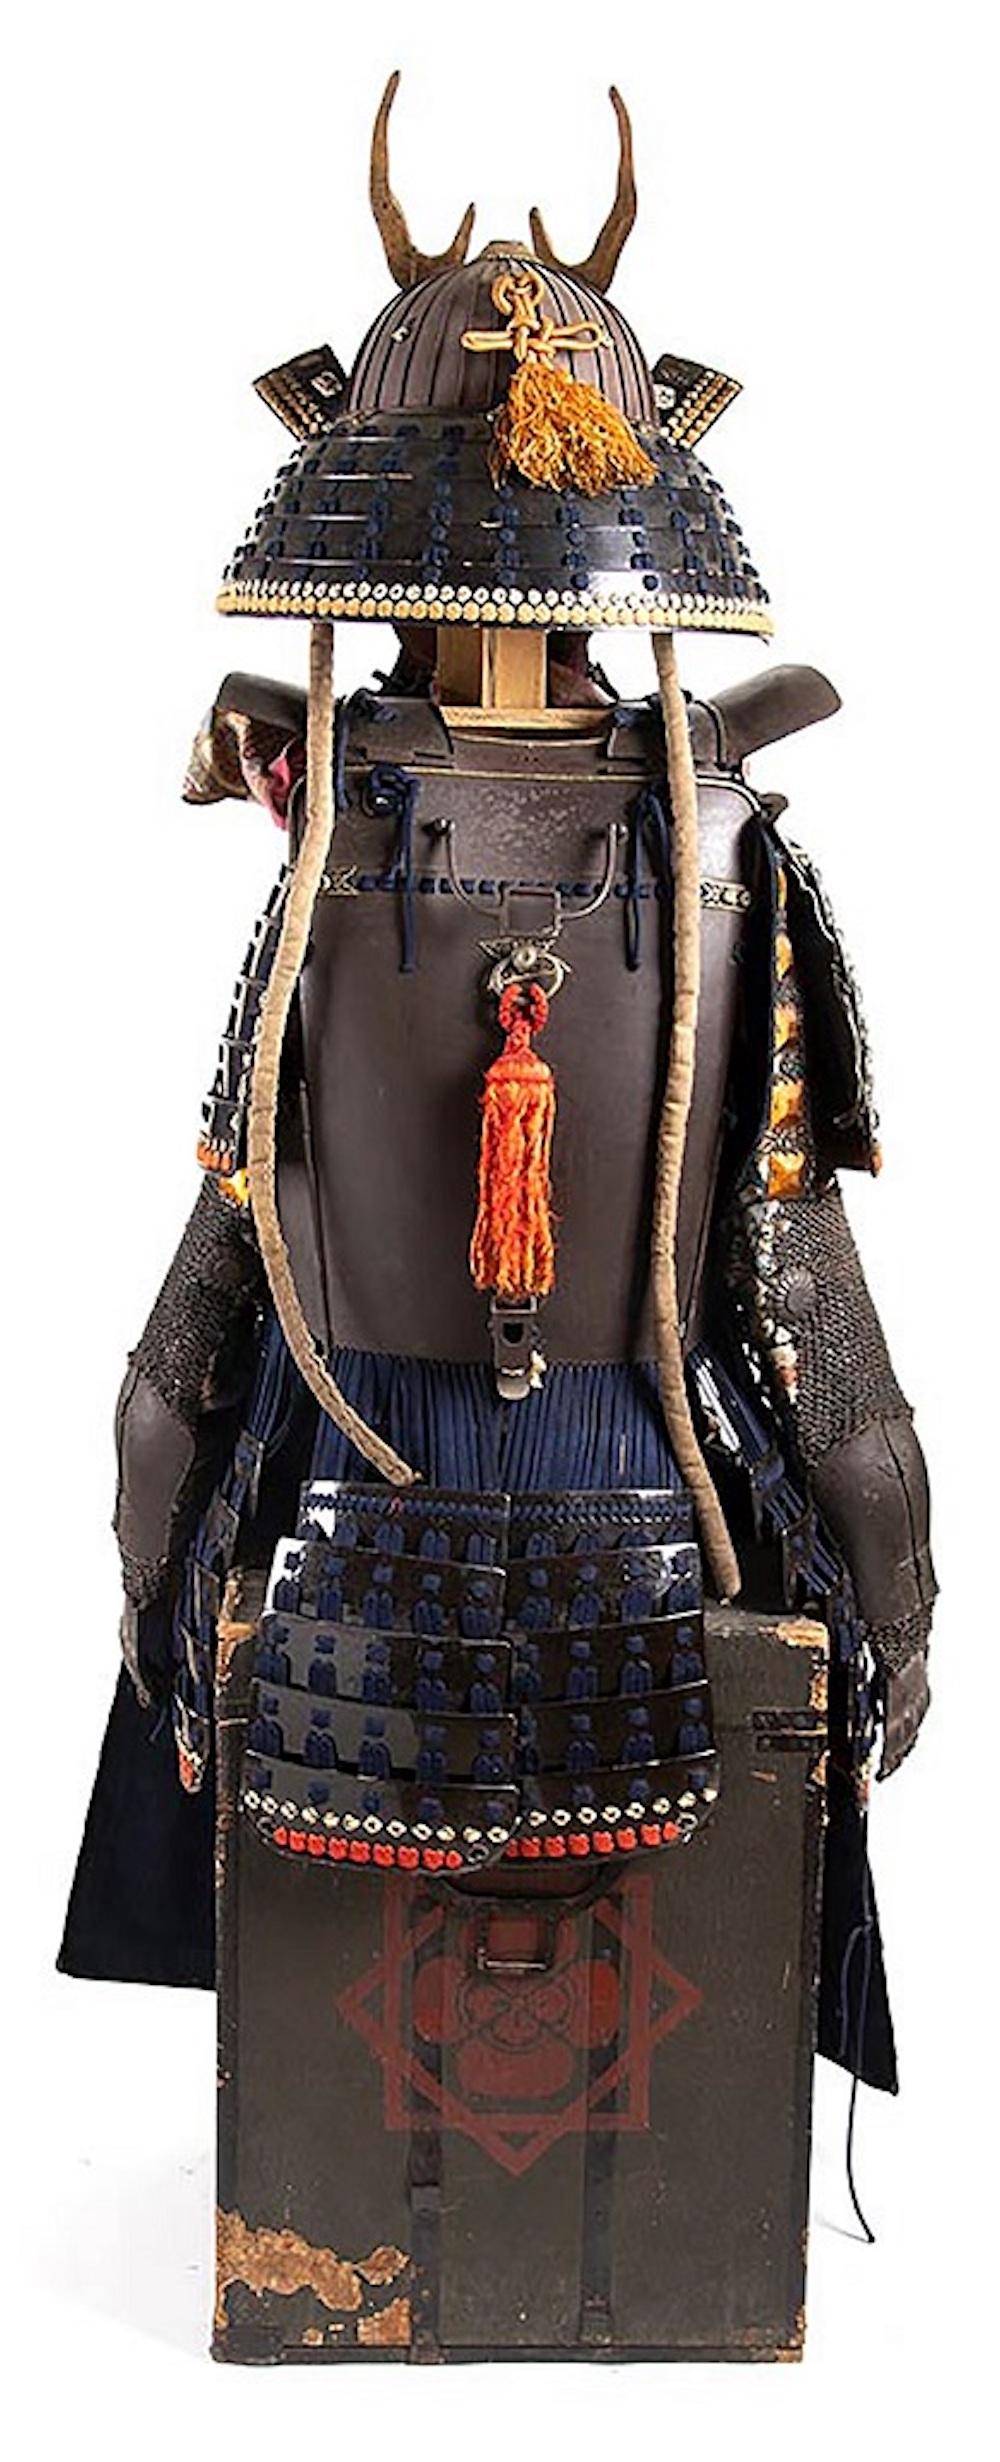 Full body armor - Japan, Edo period is a unique decorative object manufactured in Japan during the Edo period (1603-1868), in the 18th century.

Dimension: 150 cm (height)

The samurai is one of the symbol of the Land of the Rising Sun. 

Each